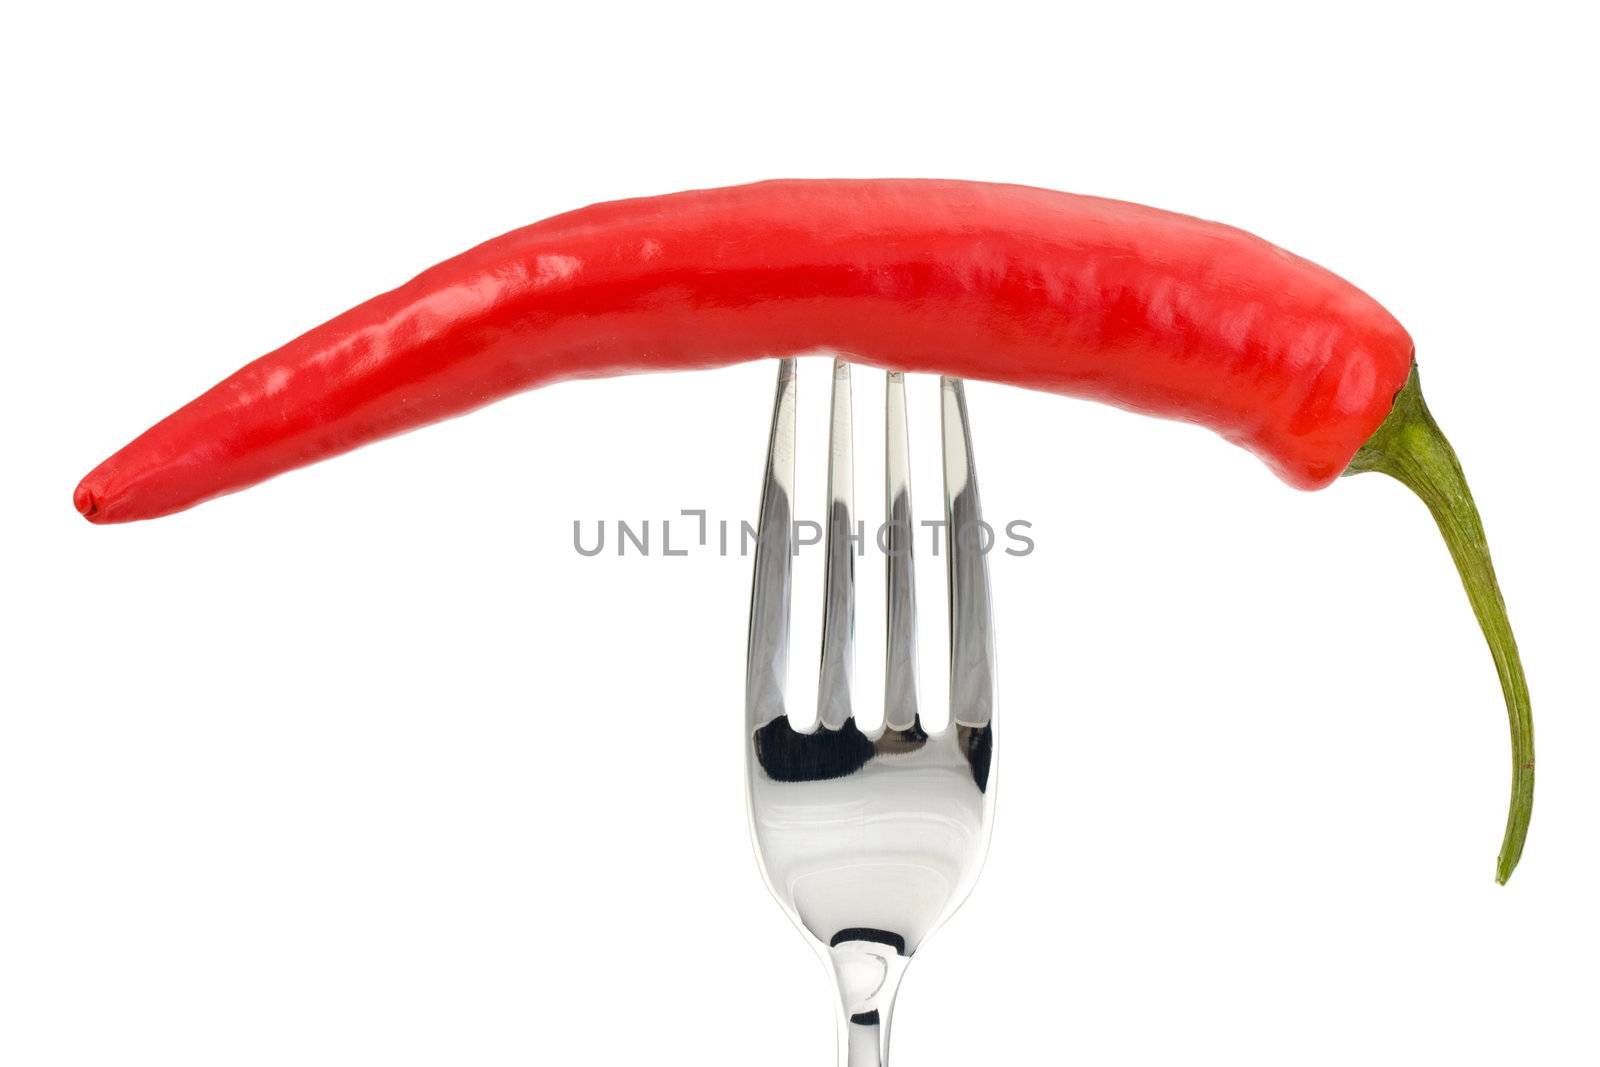 red pepper on a fork isolated on a white background by bernjuer